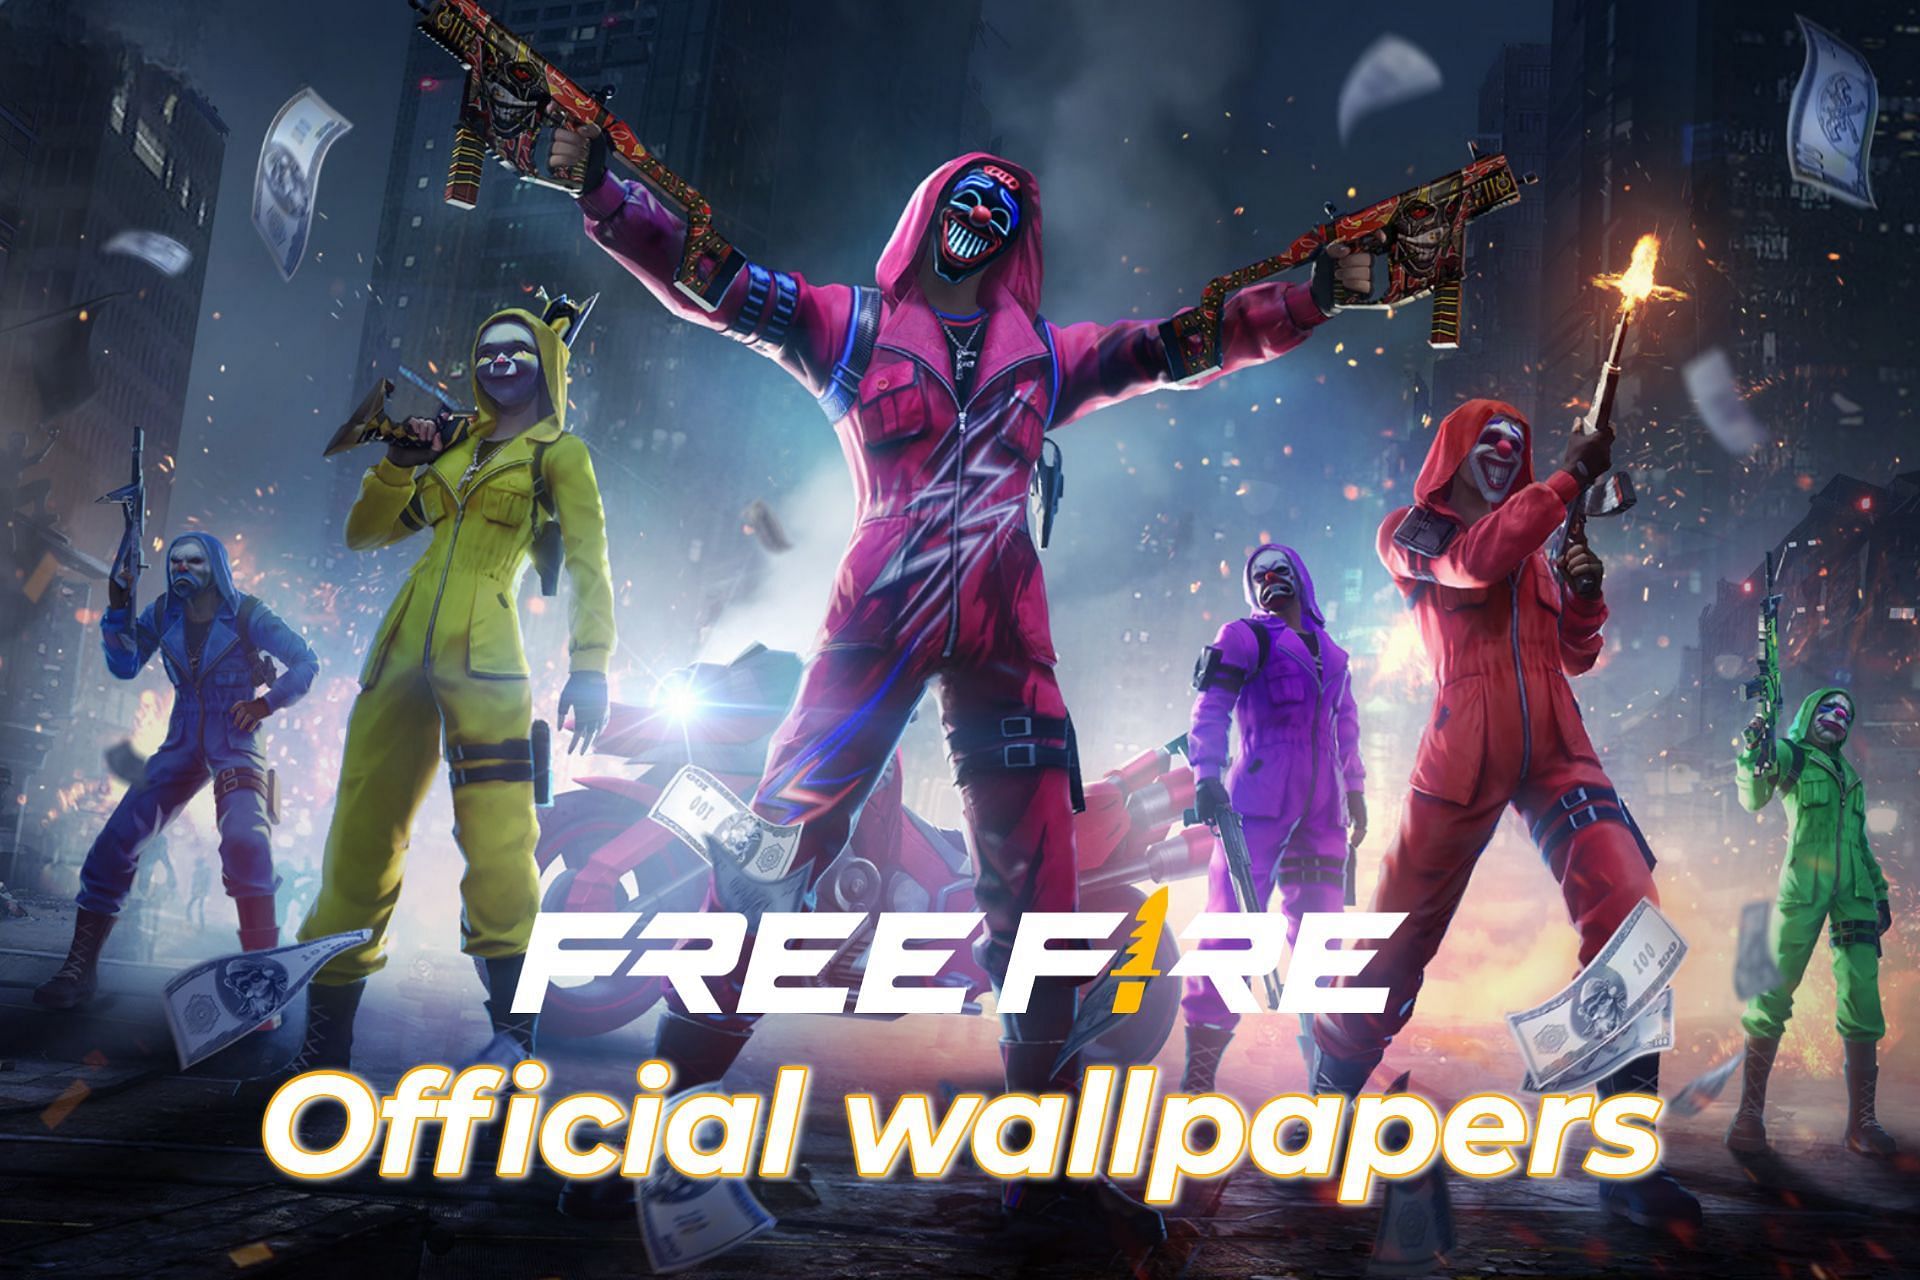 How to download Free Fire HD wallpapers